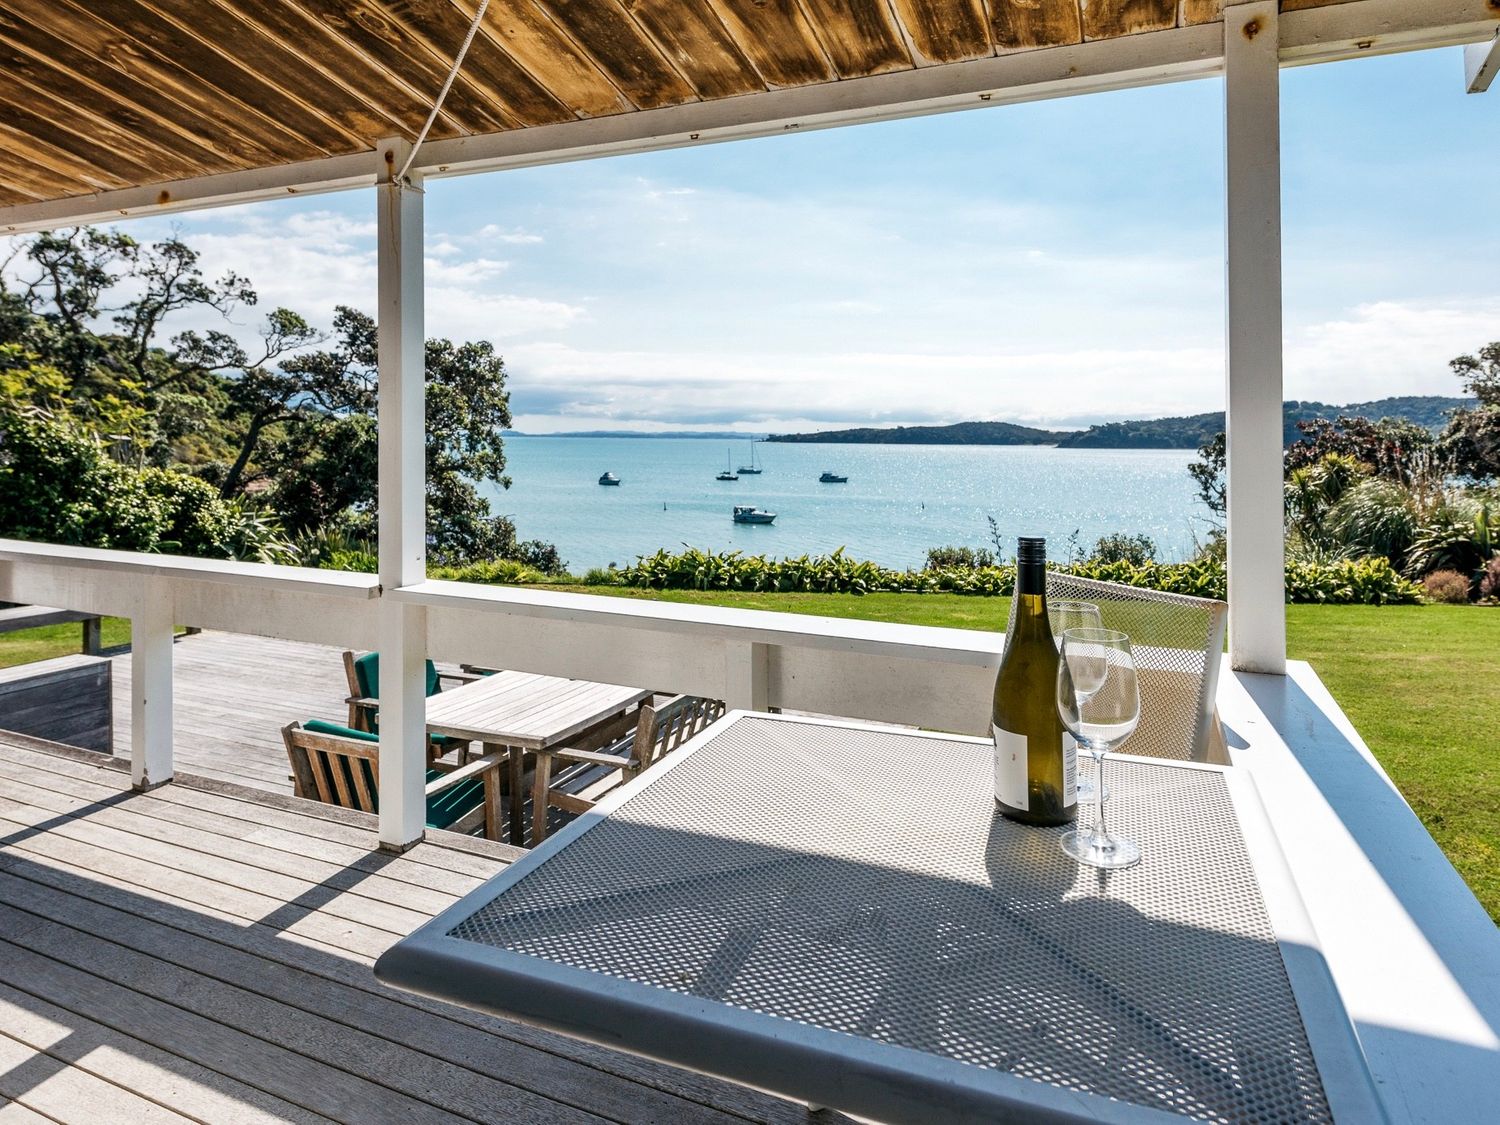 Peaceful Picnic Bay - Surfdale Holiday Home -  - 1031753 - photo 1